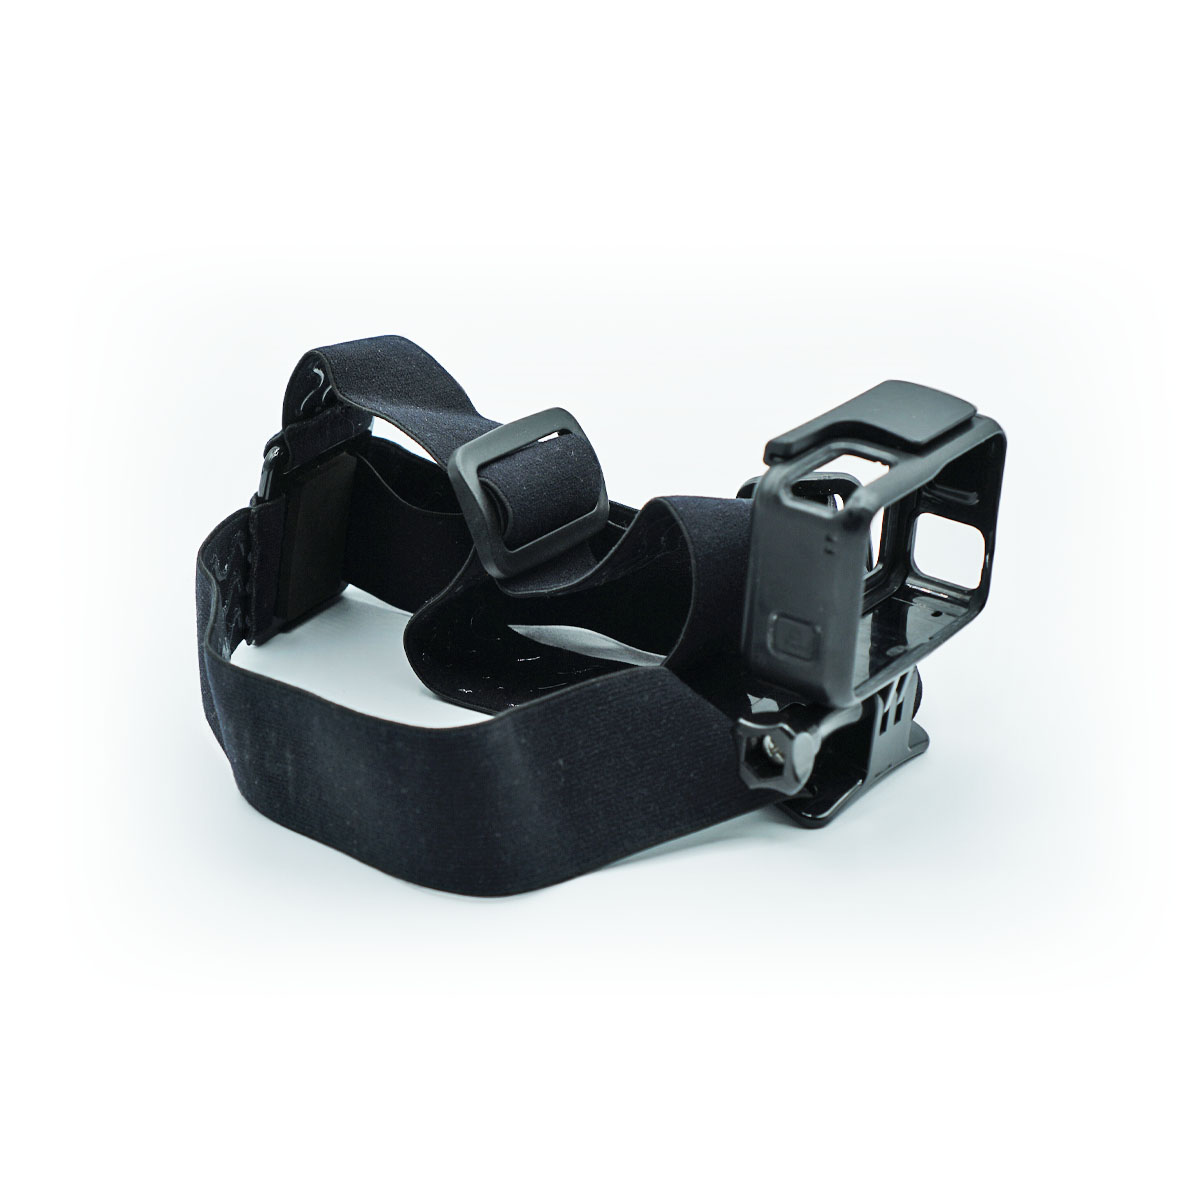 GoPro Head strap and quick clip mount